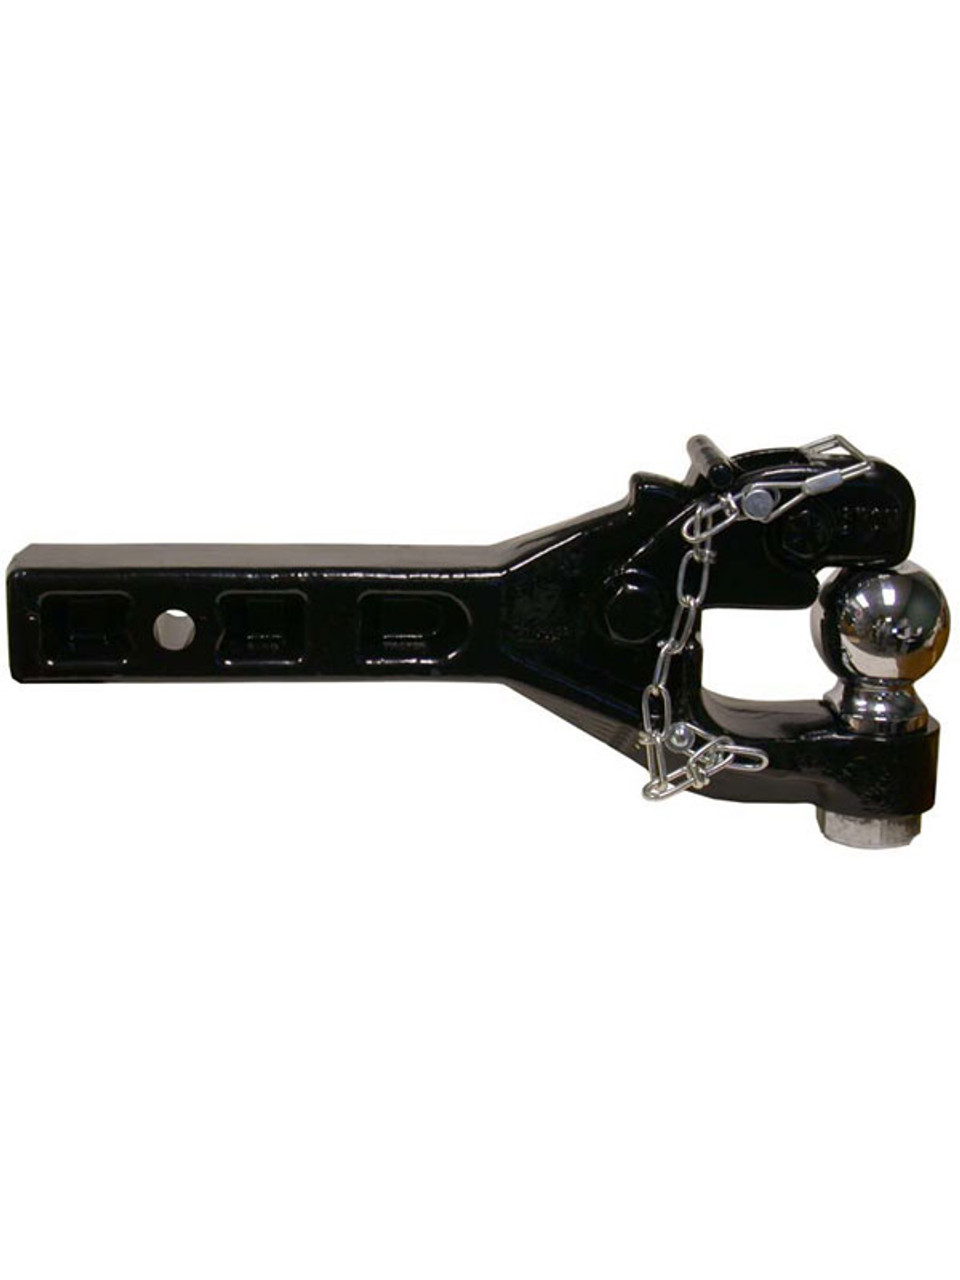 RMPH200B --- Receiver Mount Pintle Hook Combination with 2" Hitch Ball